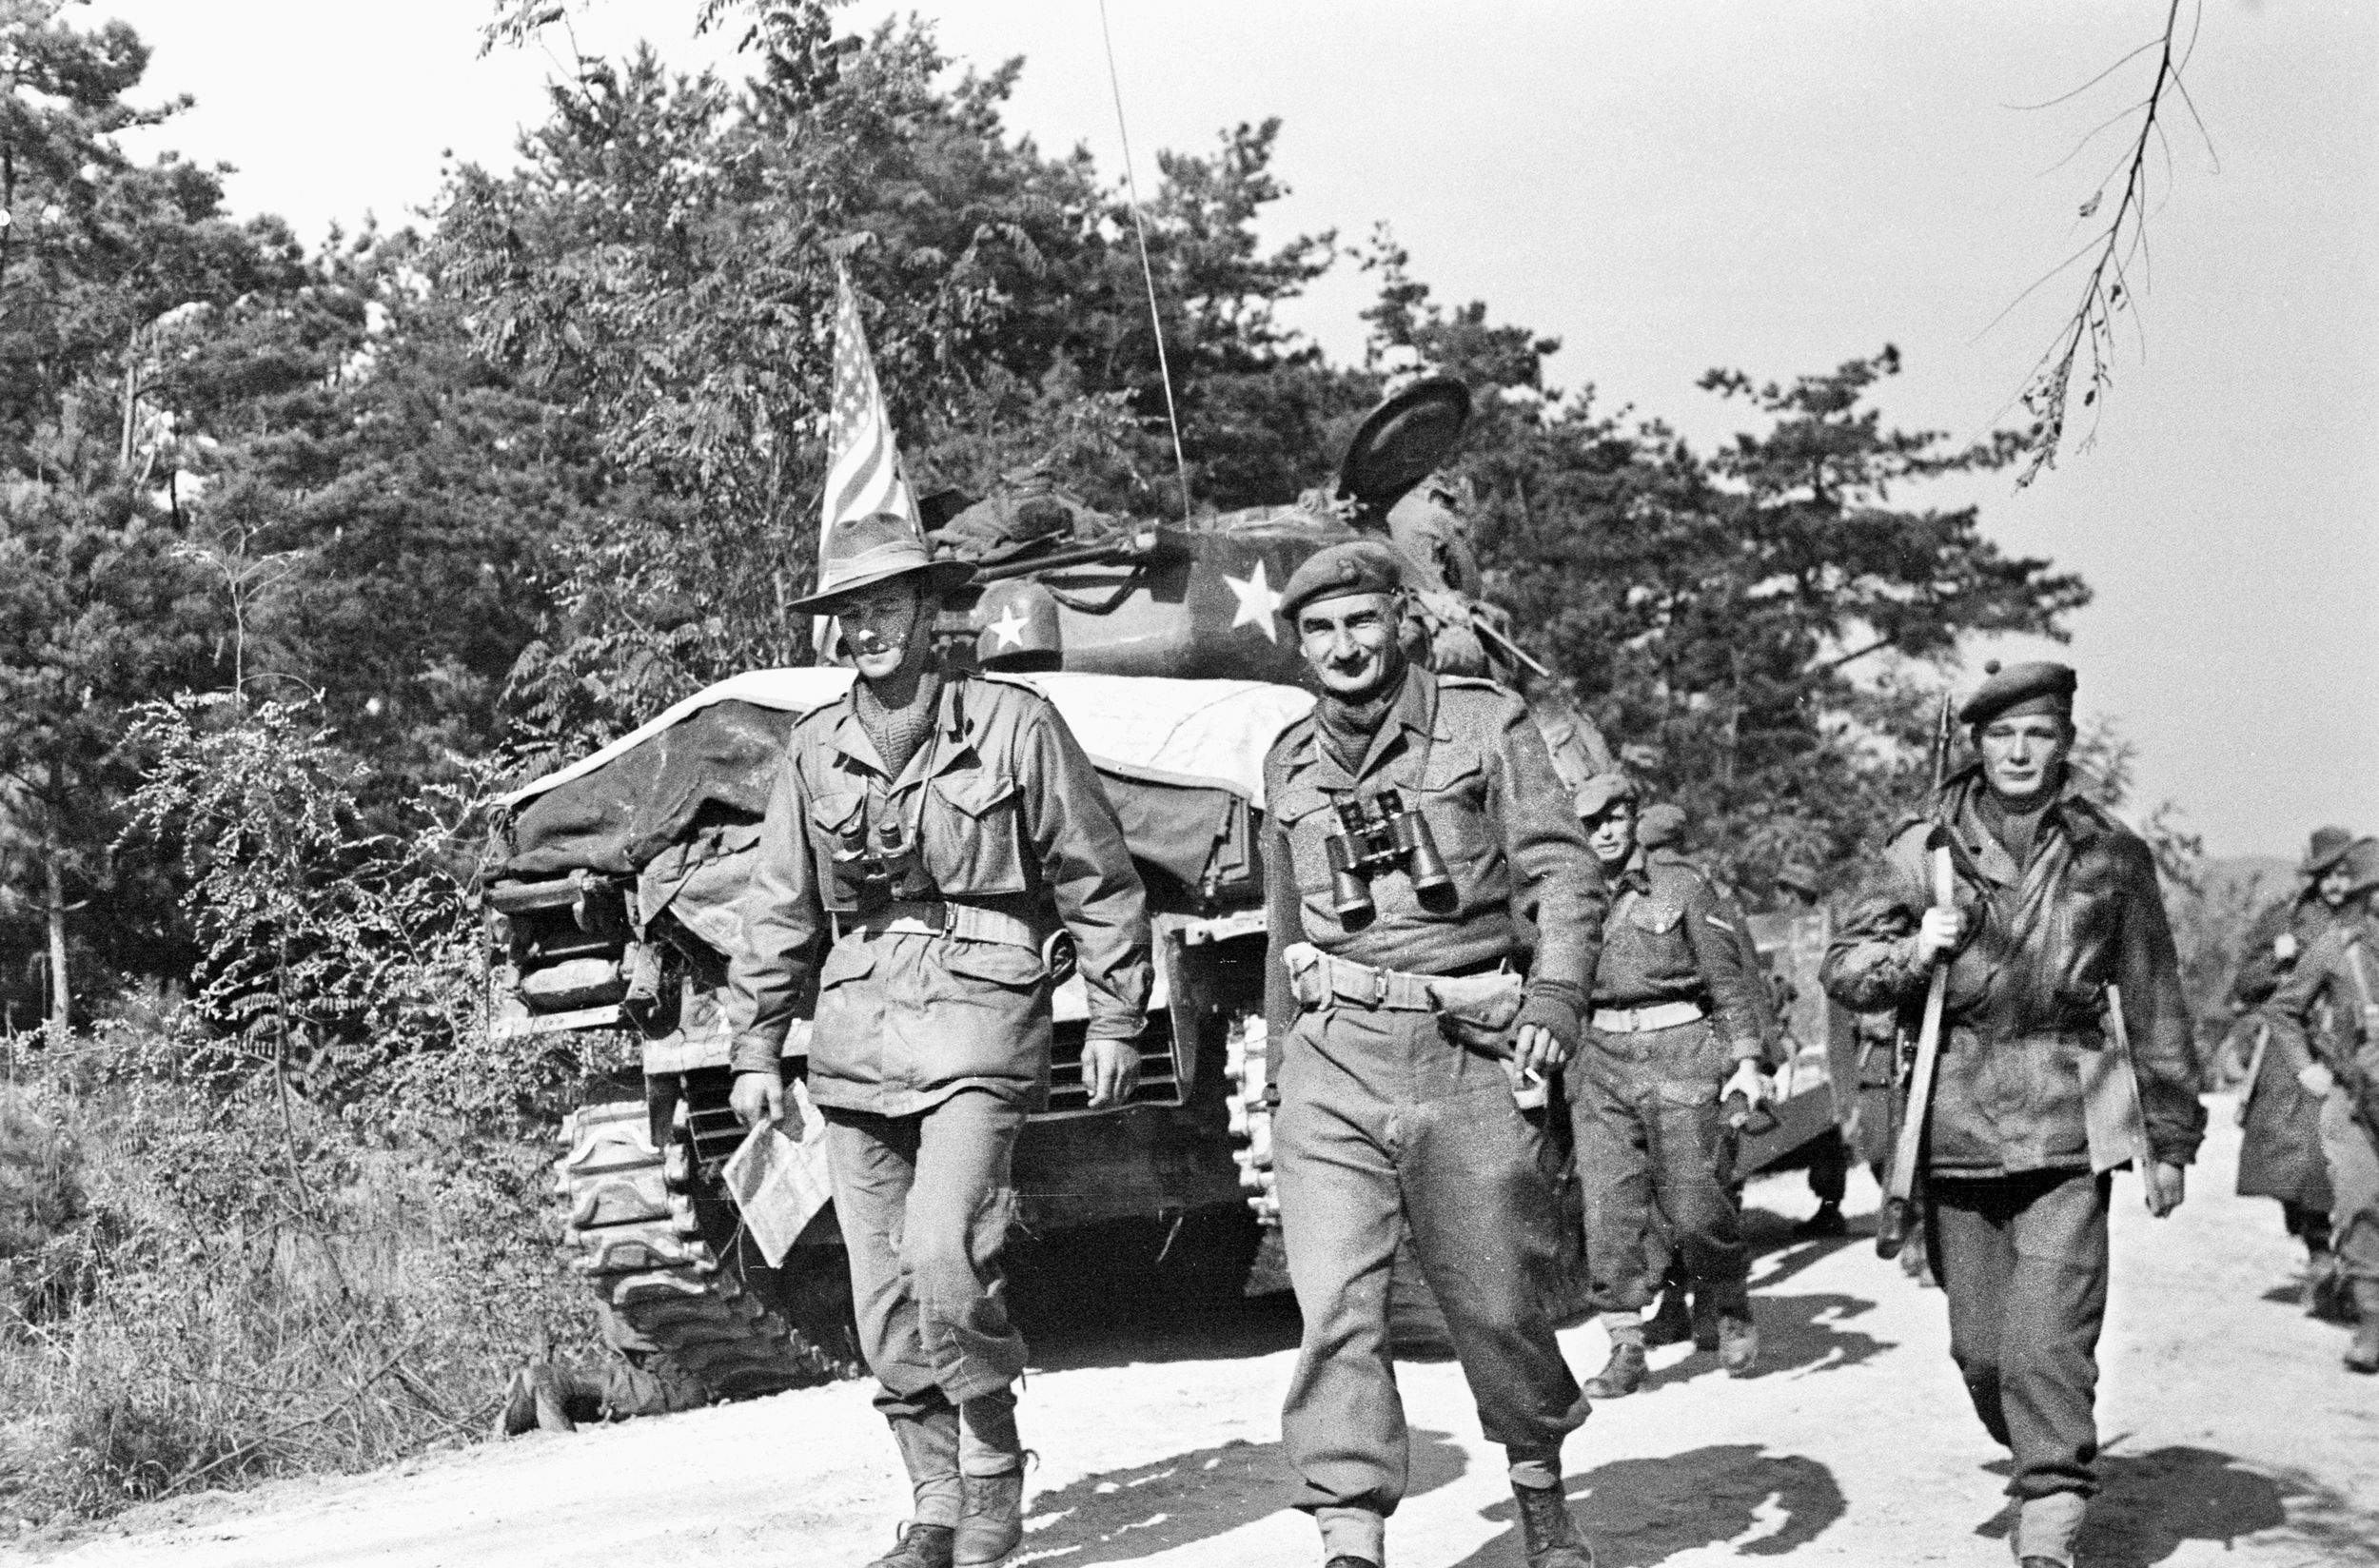 Australians Lieutenant Colonel Charles Green, left, and Brigadier General Basil Coad return from a reconnaissance where they encountered North Korean troops a half mile east of Chongju, North Korea, on the morning of Oct. 29, 1950. The U.N. forces would take Chongju from the retreating NKPA two days later. That evening, an incoming artillery shell mortally wounded Green, who died on November 1. The U.S. Army posthumously awarded him a Silver Star.
